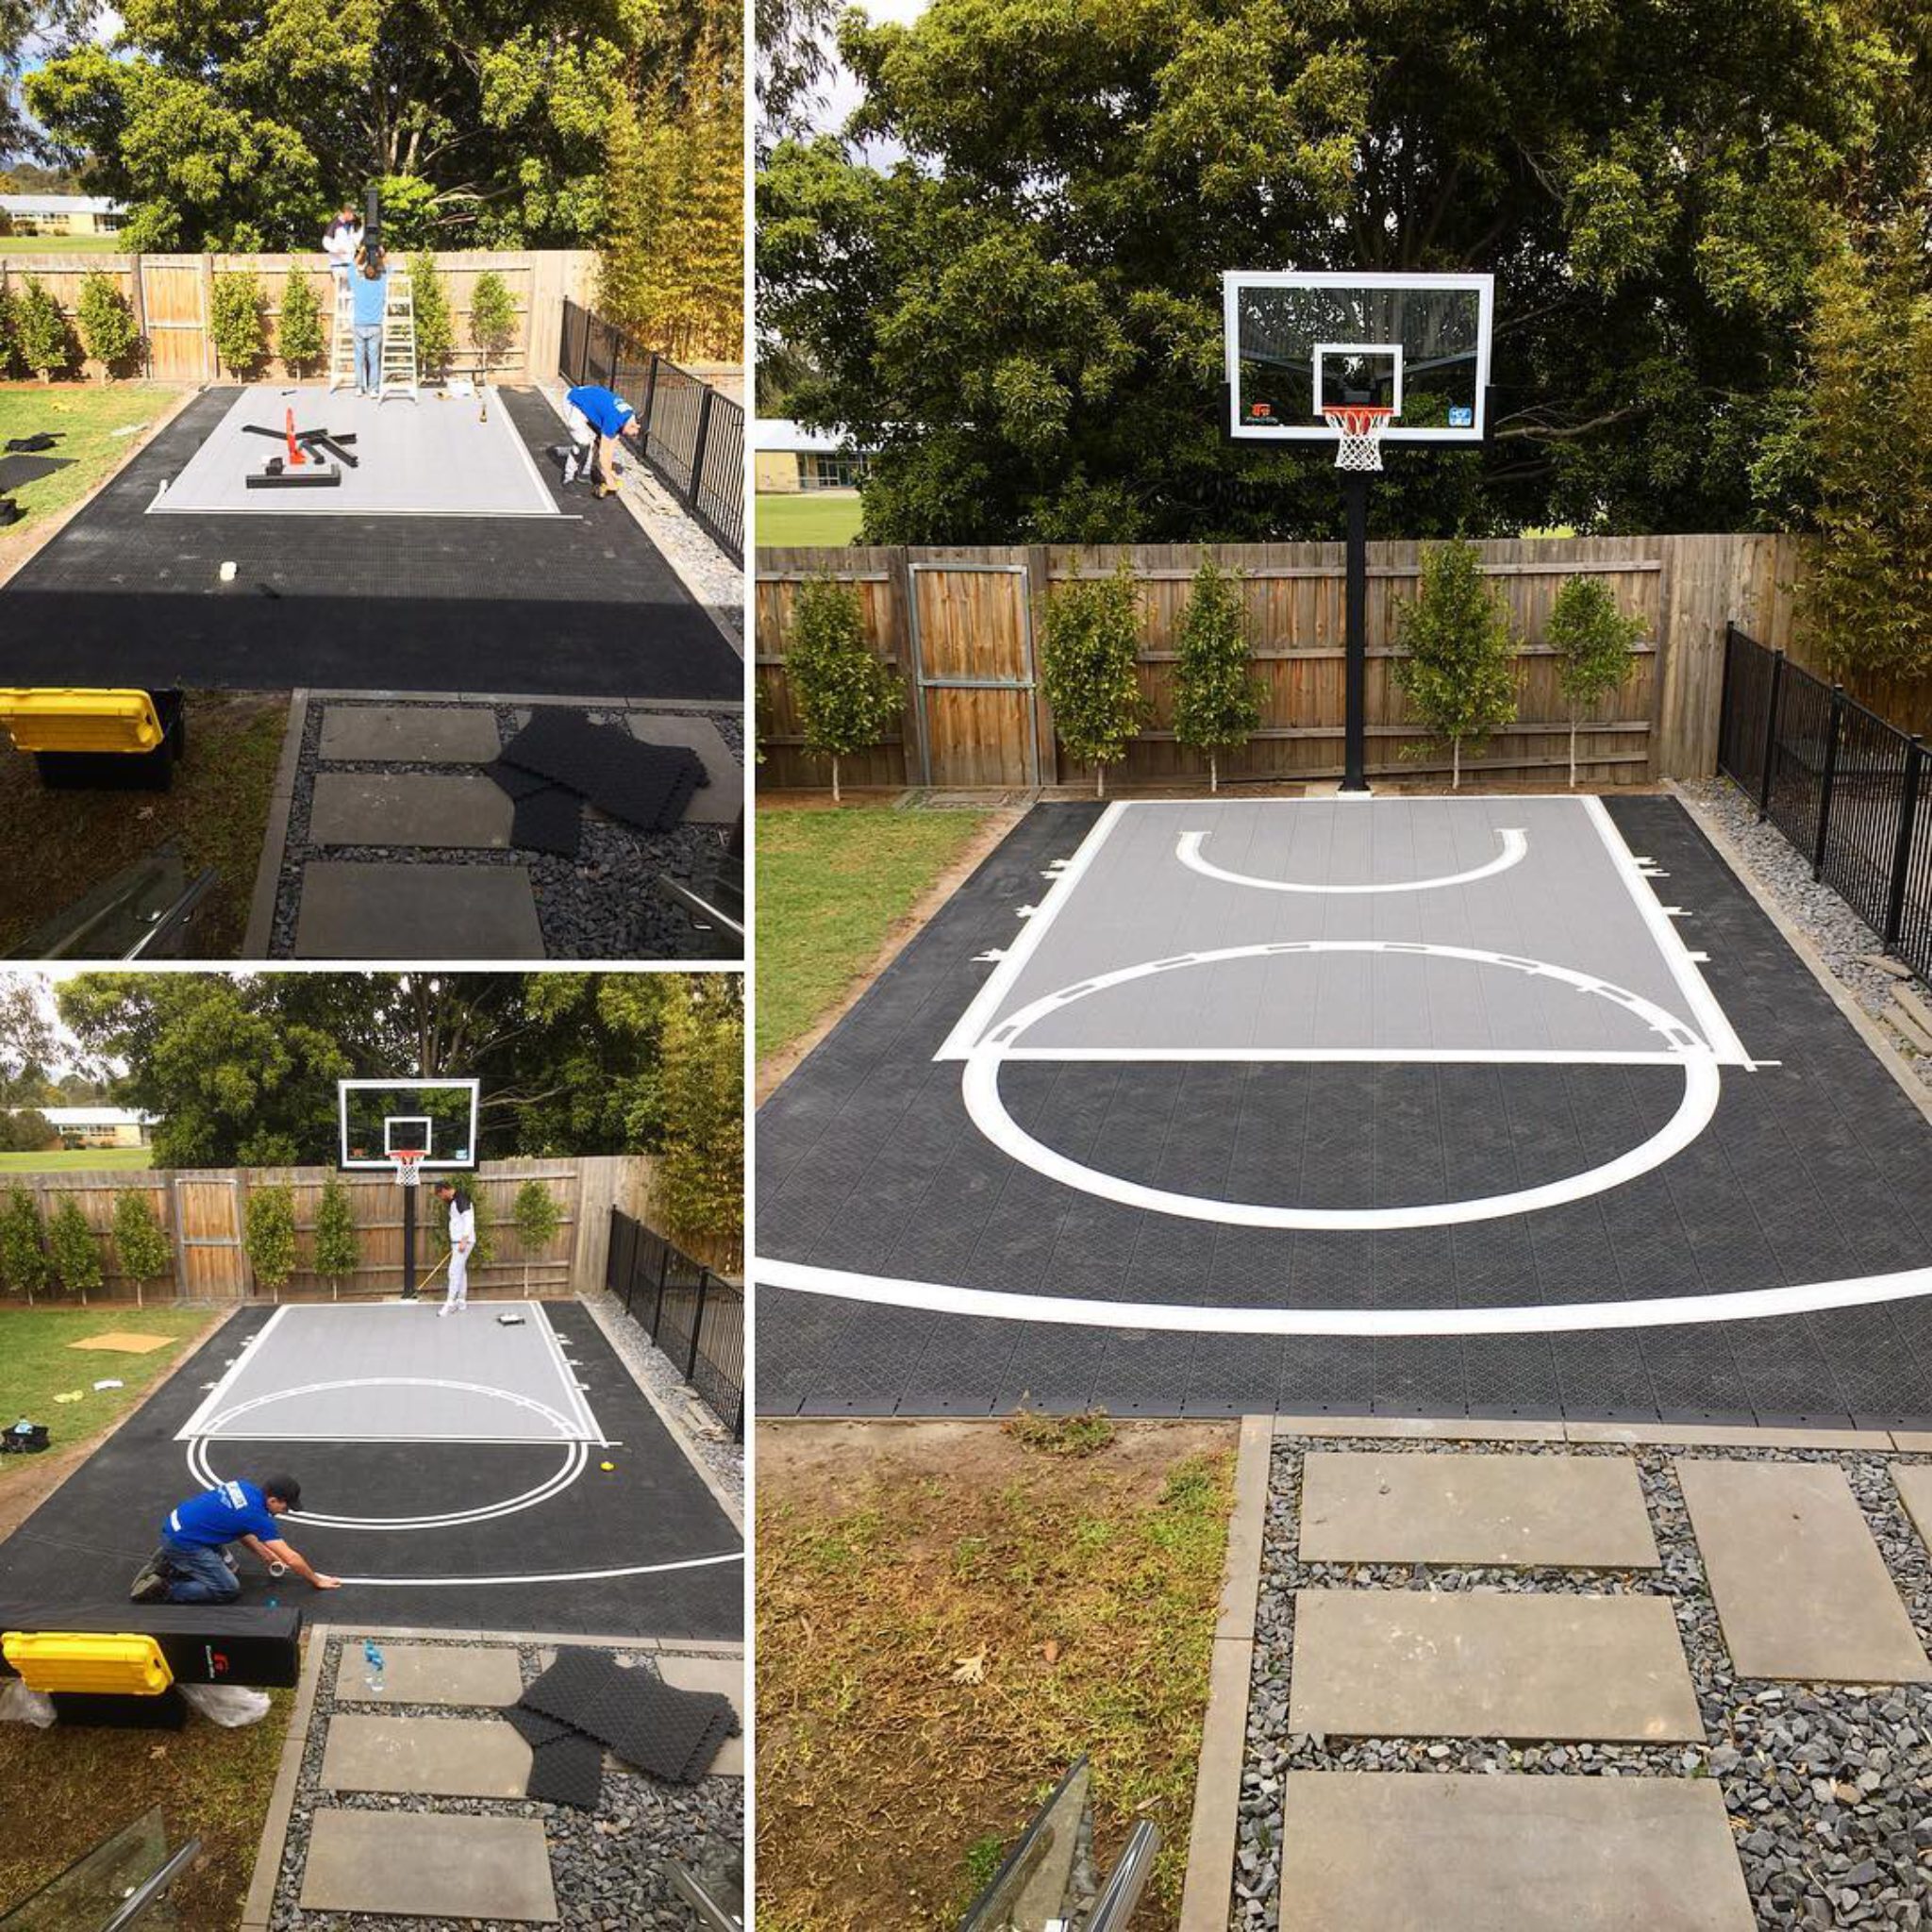 How Much Does a Basketball Court Cost? (Price Breakdown)